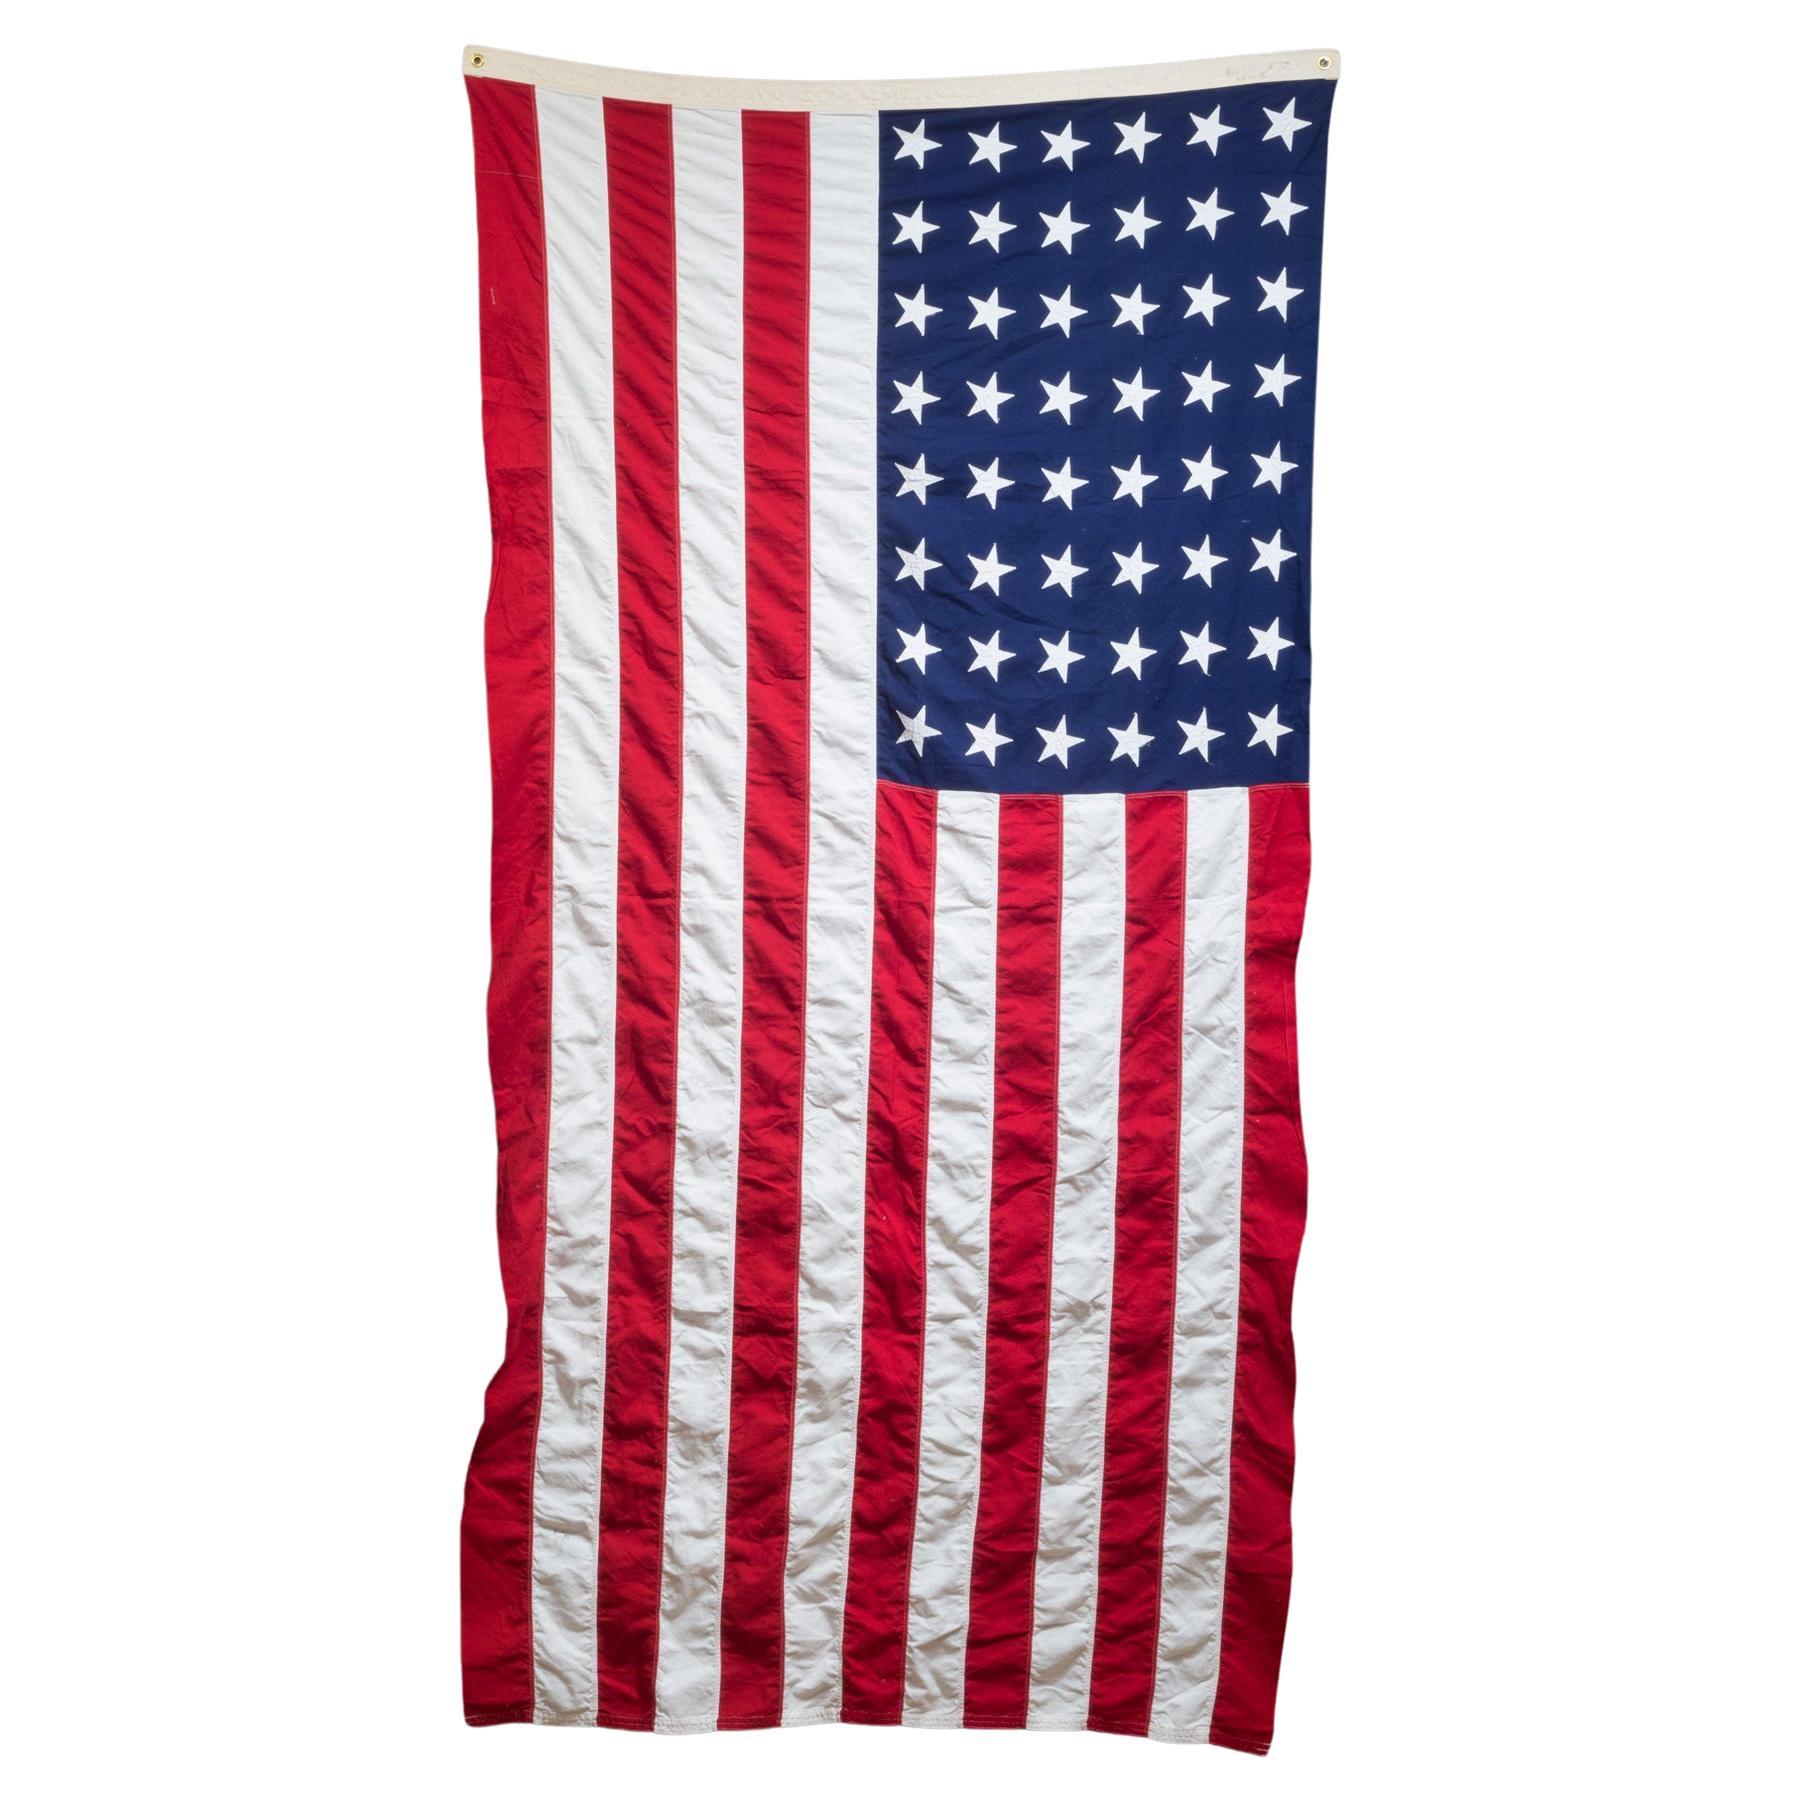 Early 20th c. Monumental American Flag with 48 Stars, c.1940-1950 For Sale